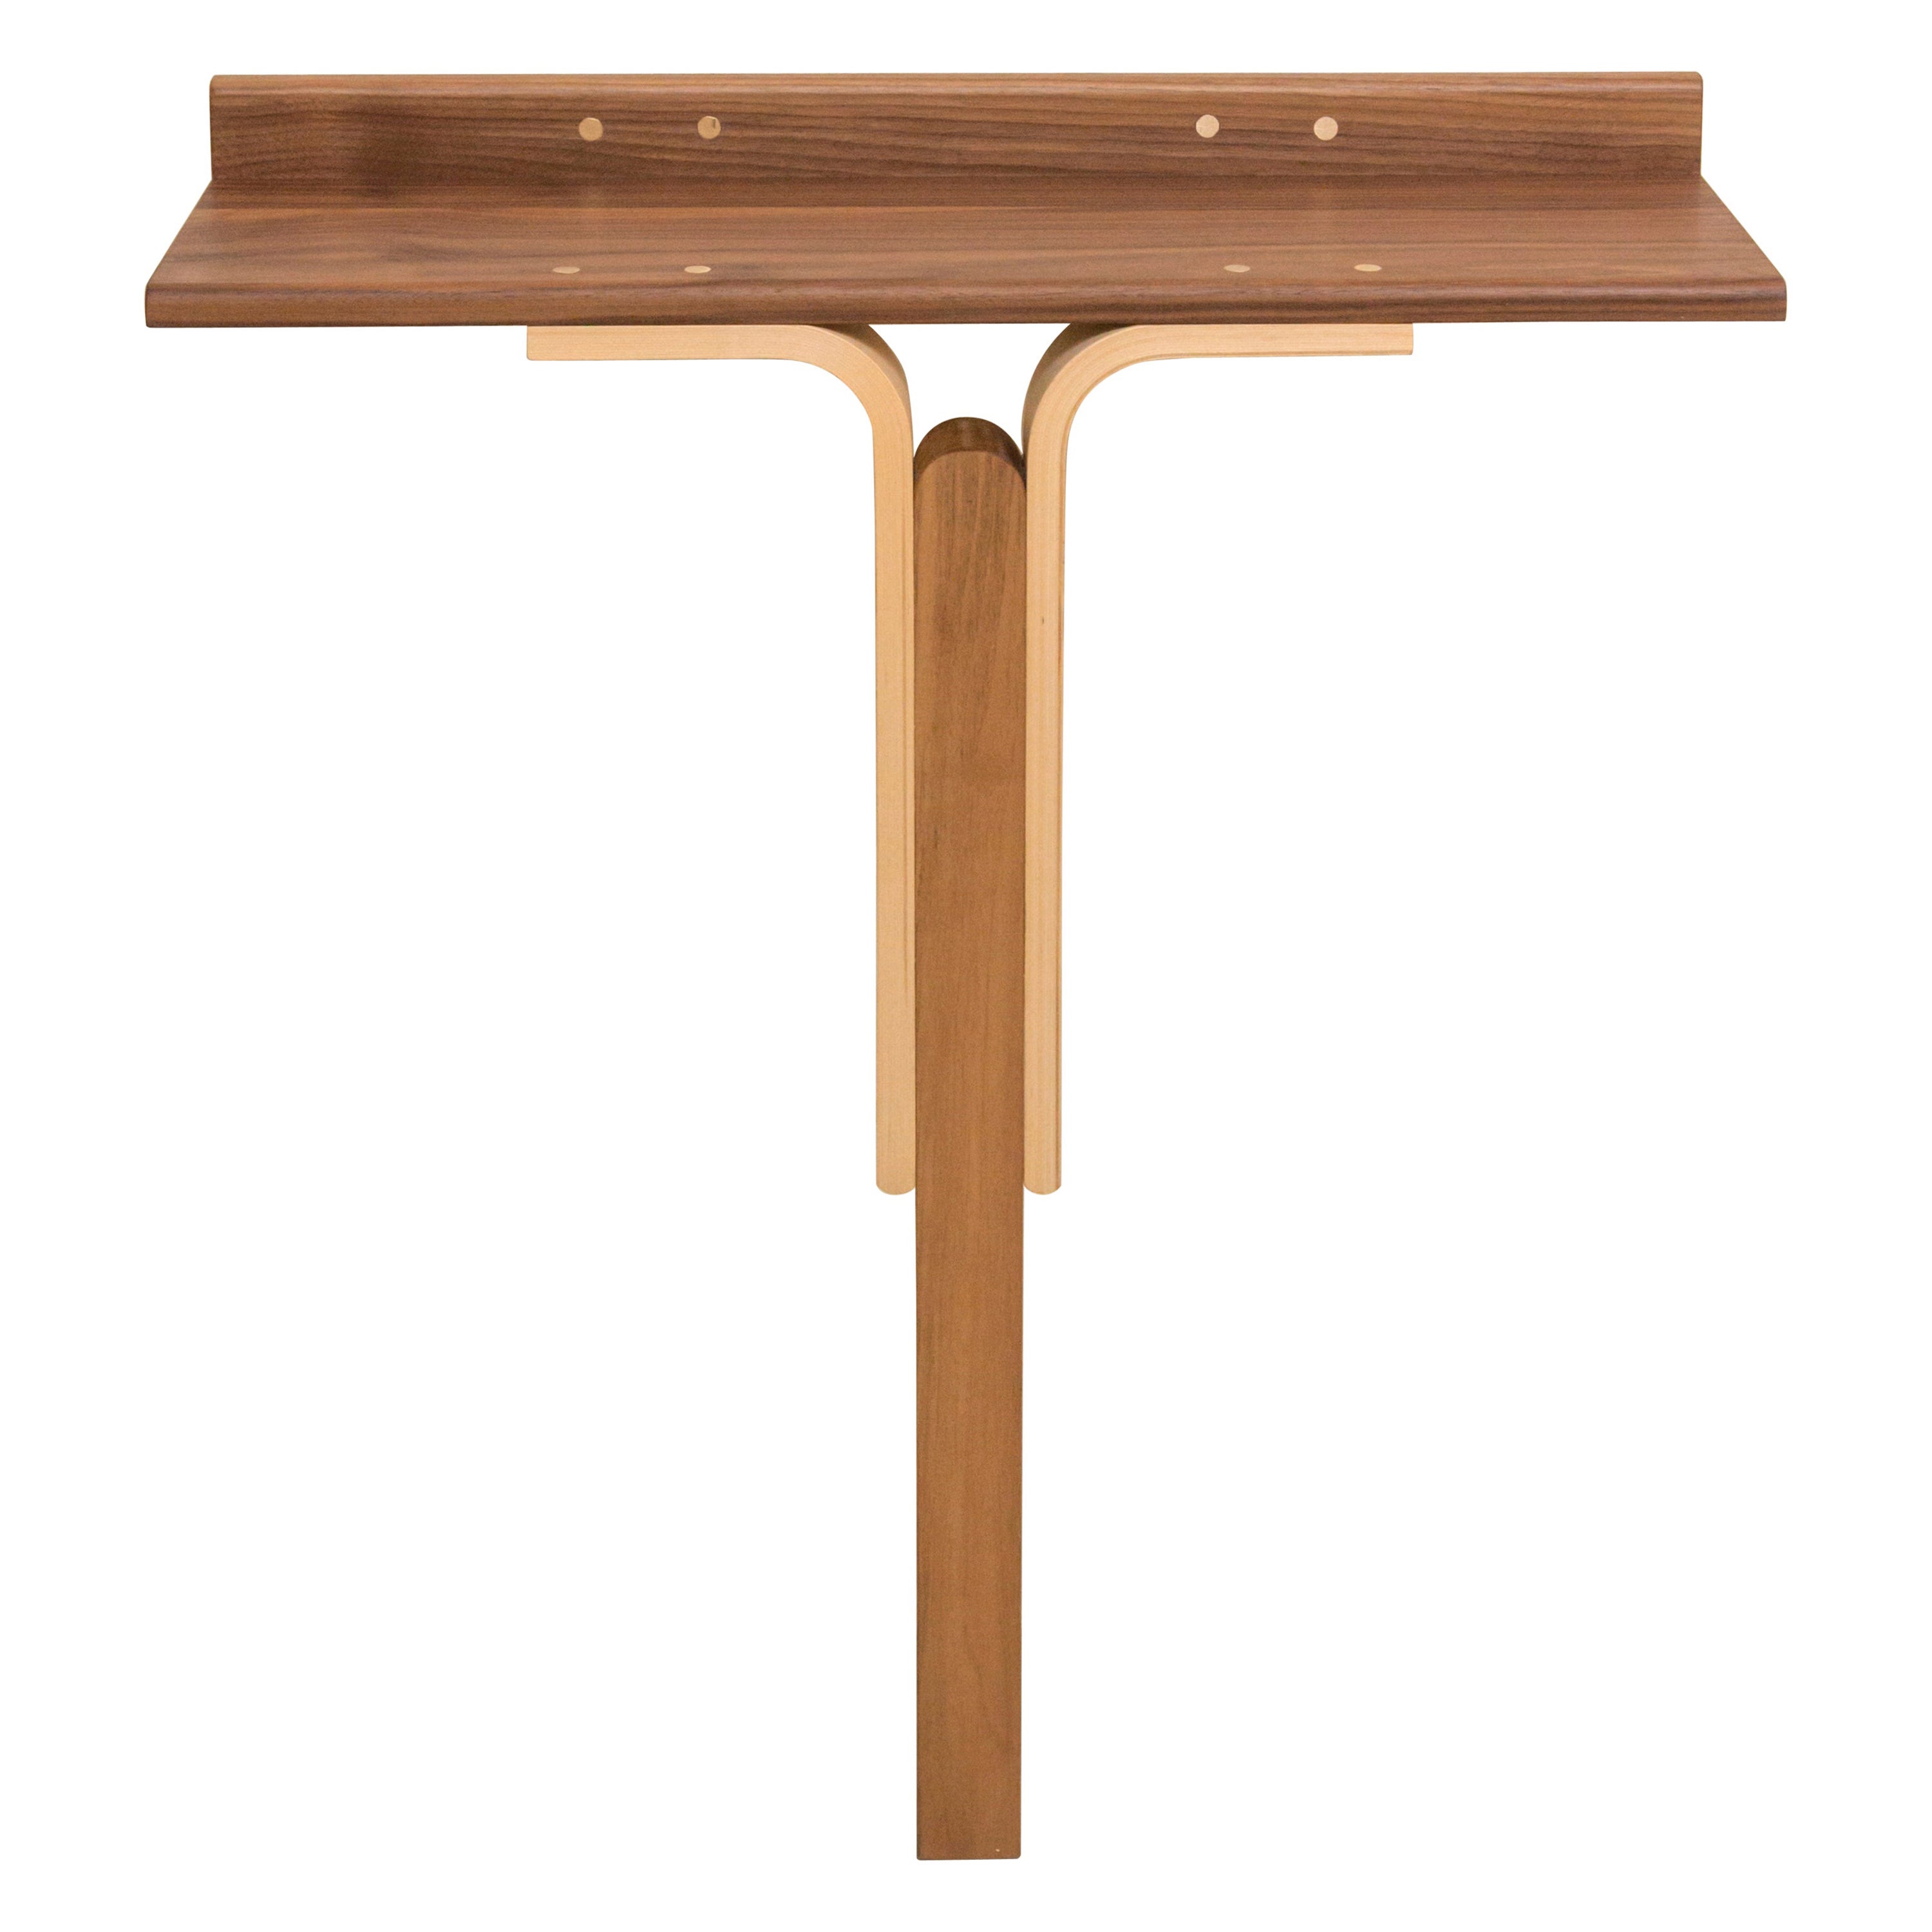 21st Century Contemporary Wood Console Table Handmade in Italy by Ilaria Bianchi